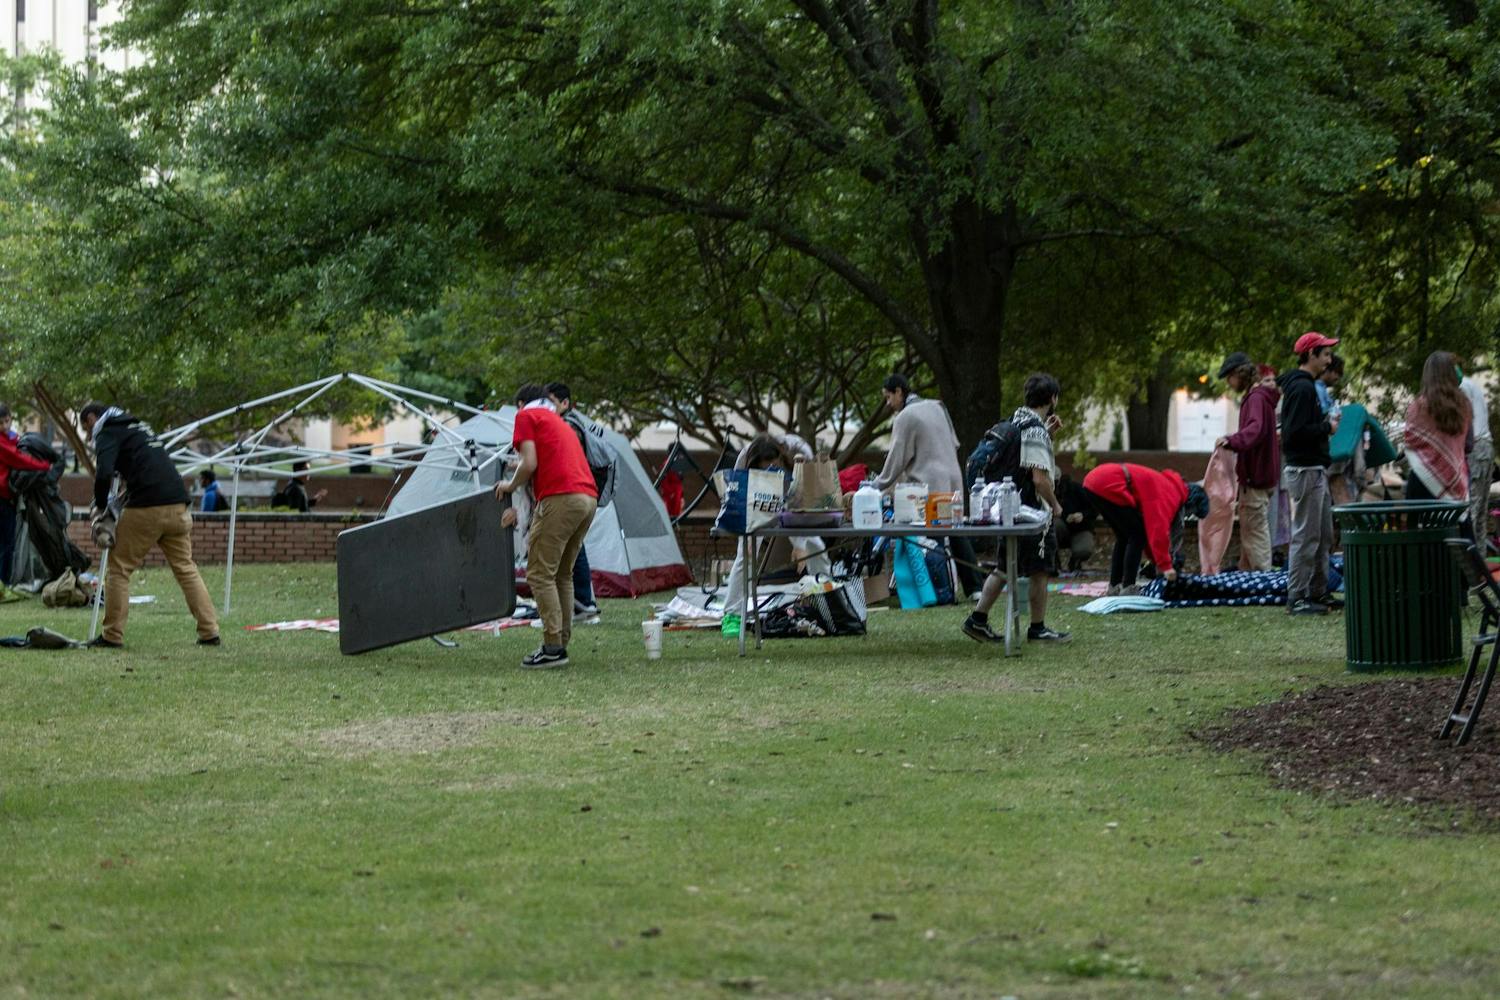 Protestors break down their tents and clean up Davis Field after spending the day in protest of the university’s Israeli-connected investors. Protestors gathered in response to actions on other college campus' across the country. "I feel like it scared the school a little bit, which is always a good thing," third-year sociology major Andrés Gonzalez said.